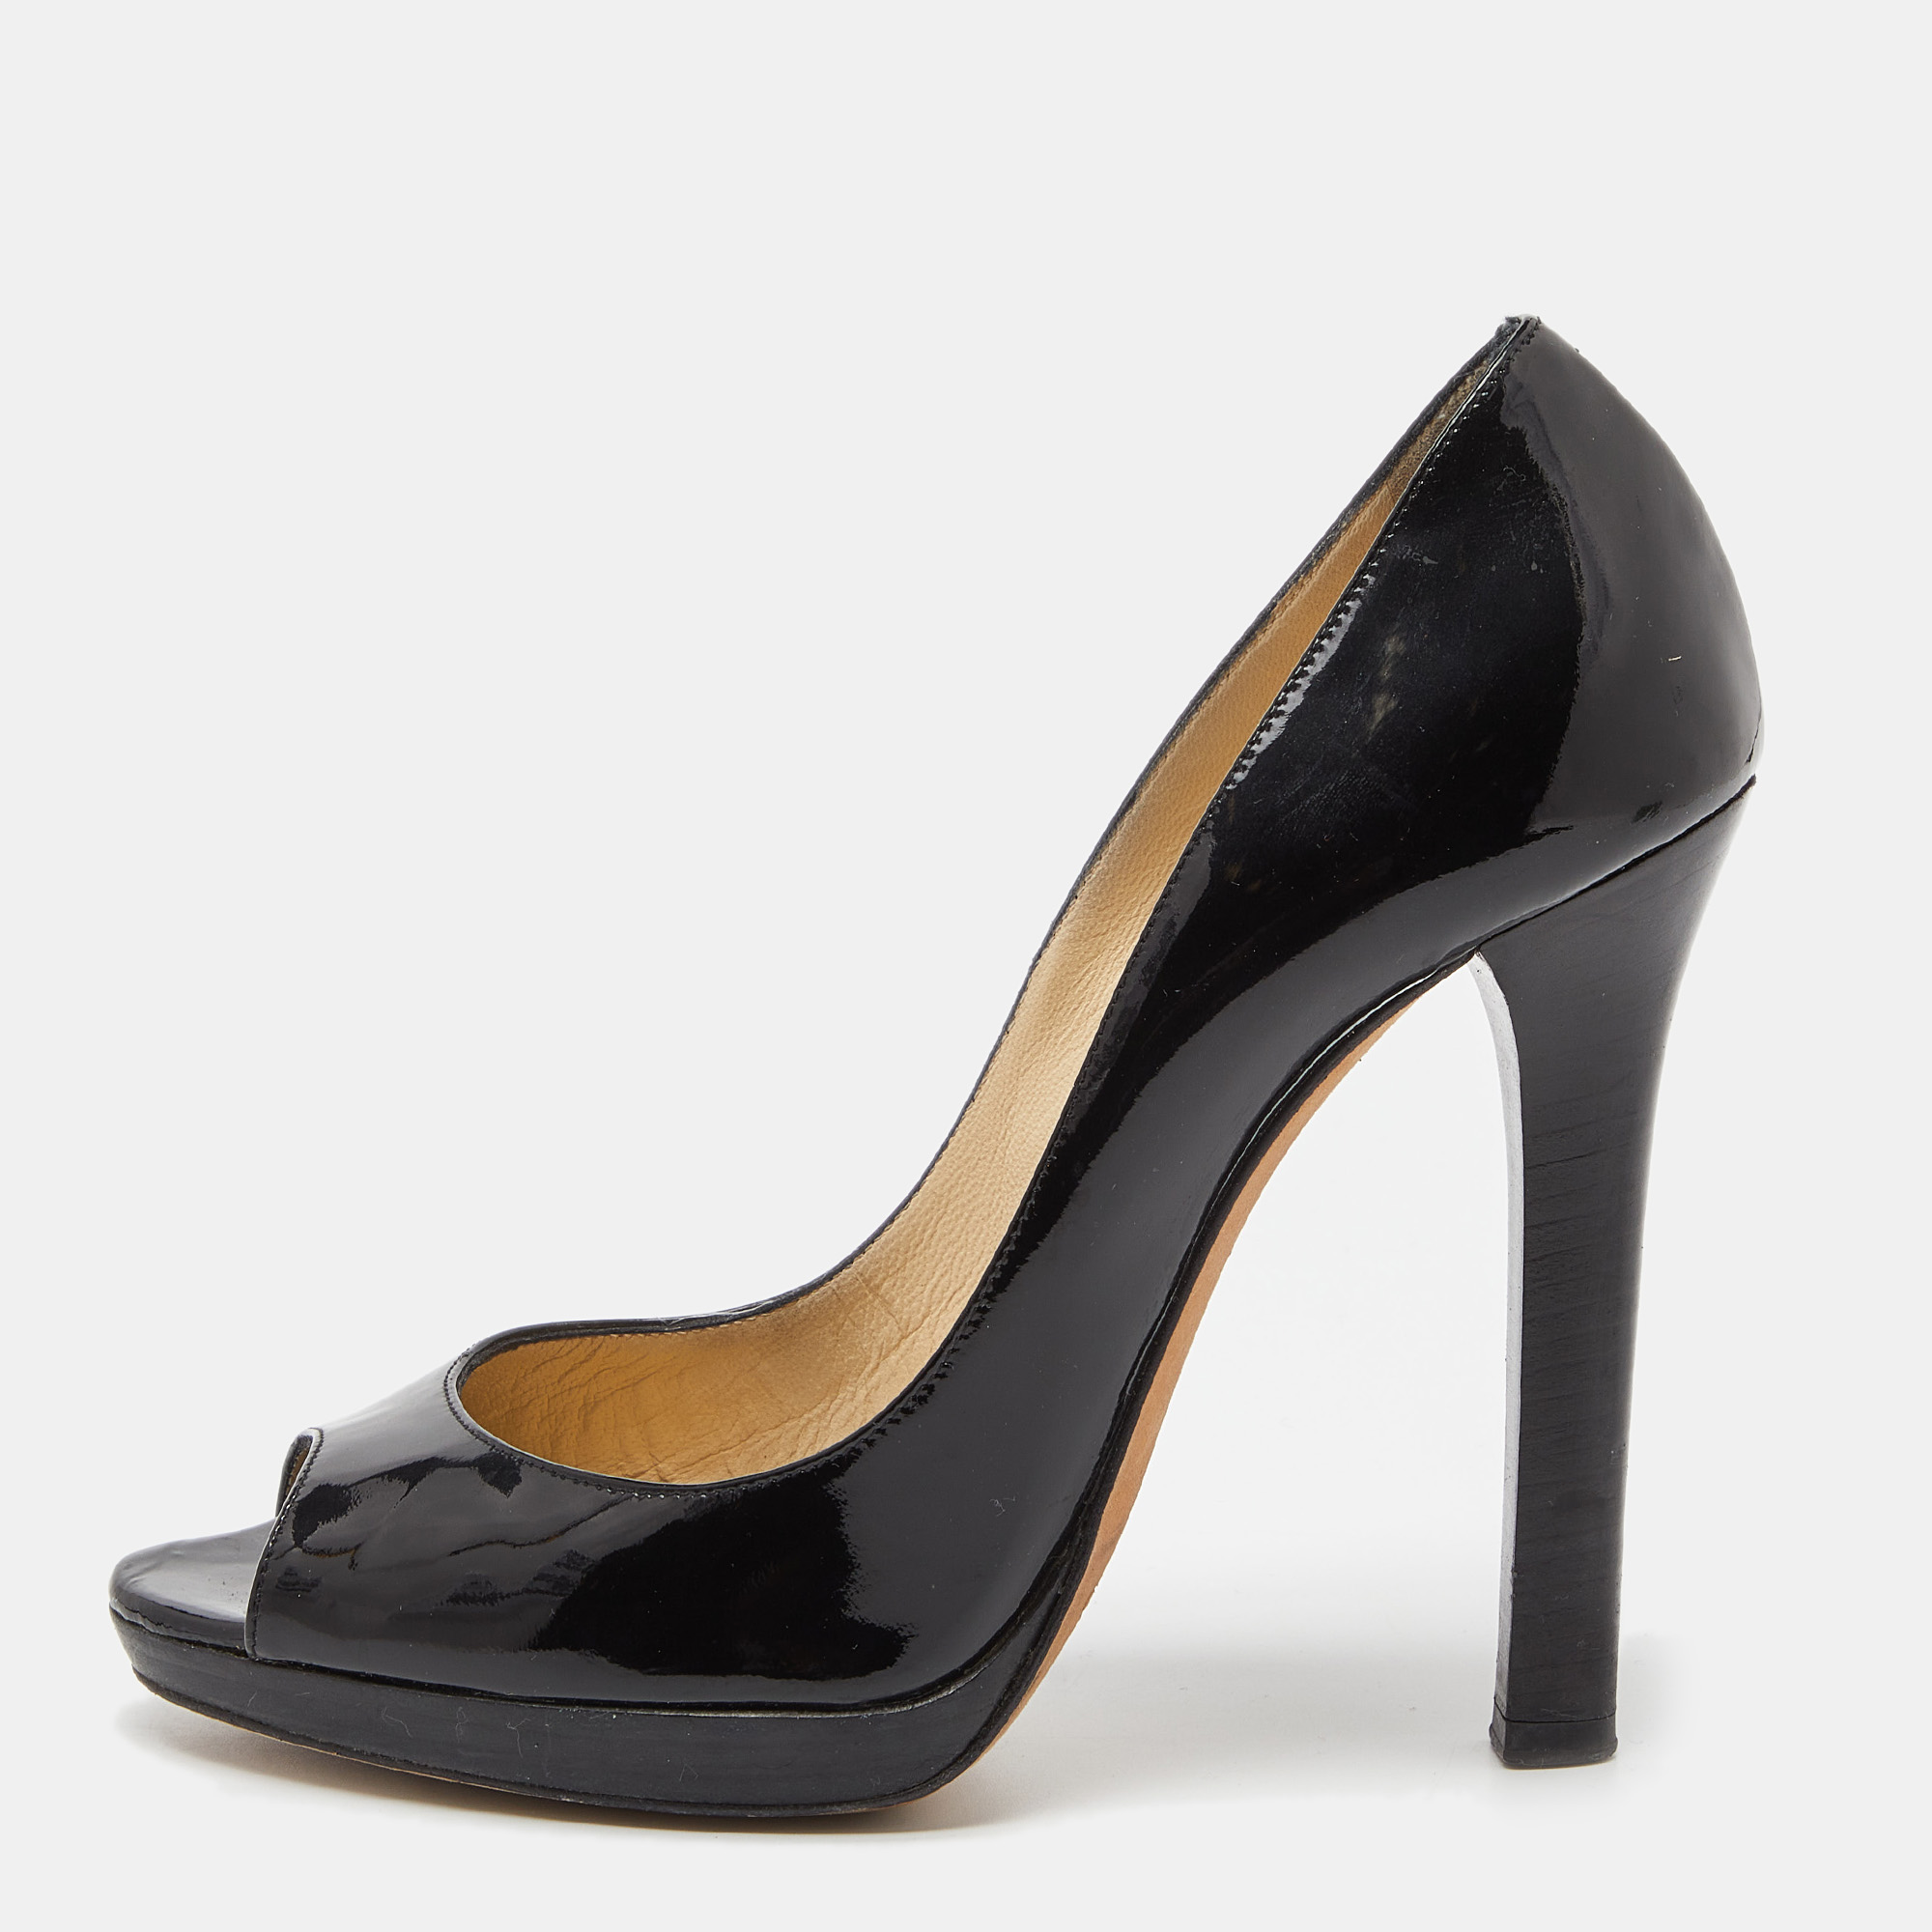 These timeless Dior black pumps are meant to last you season after season. They have a comfortable fit and high quality finish.